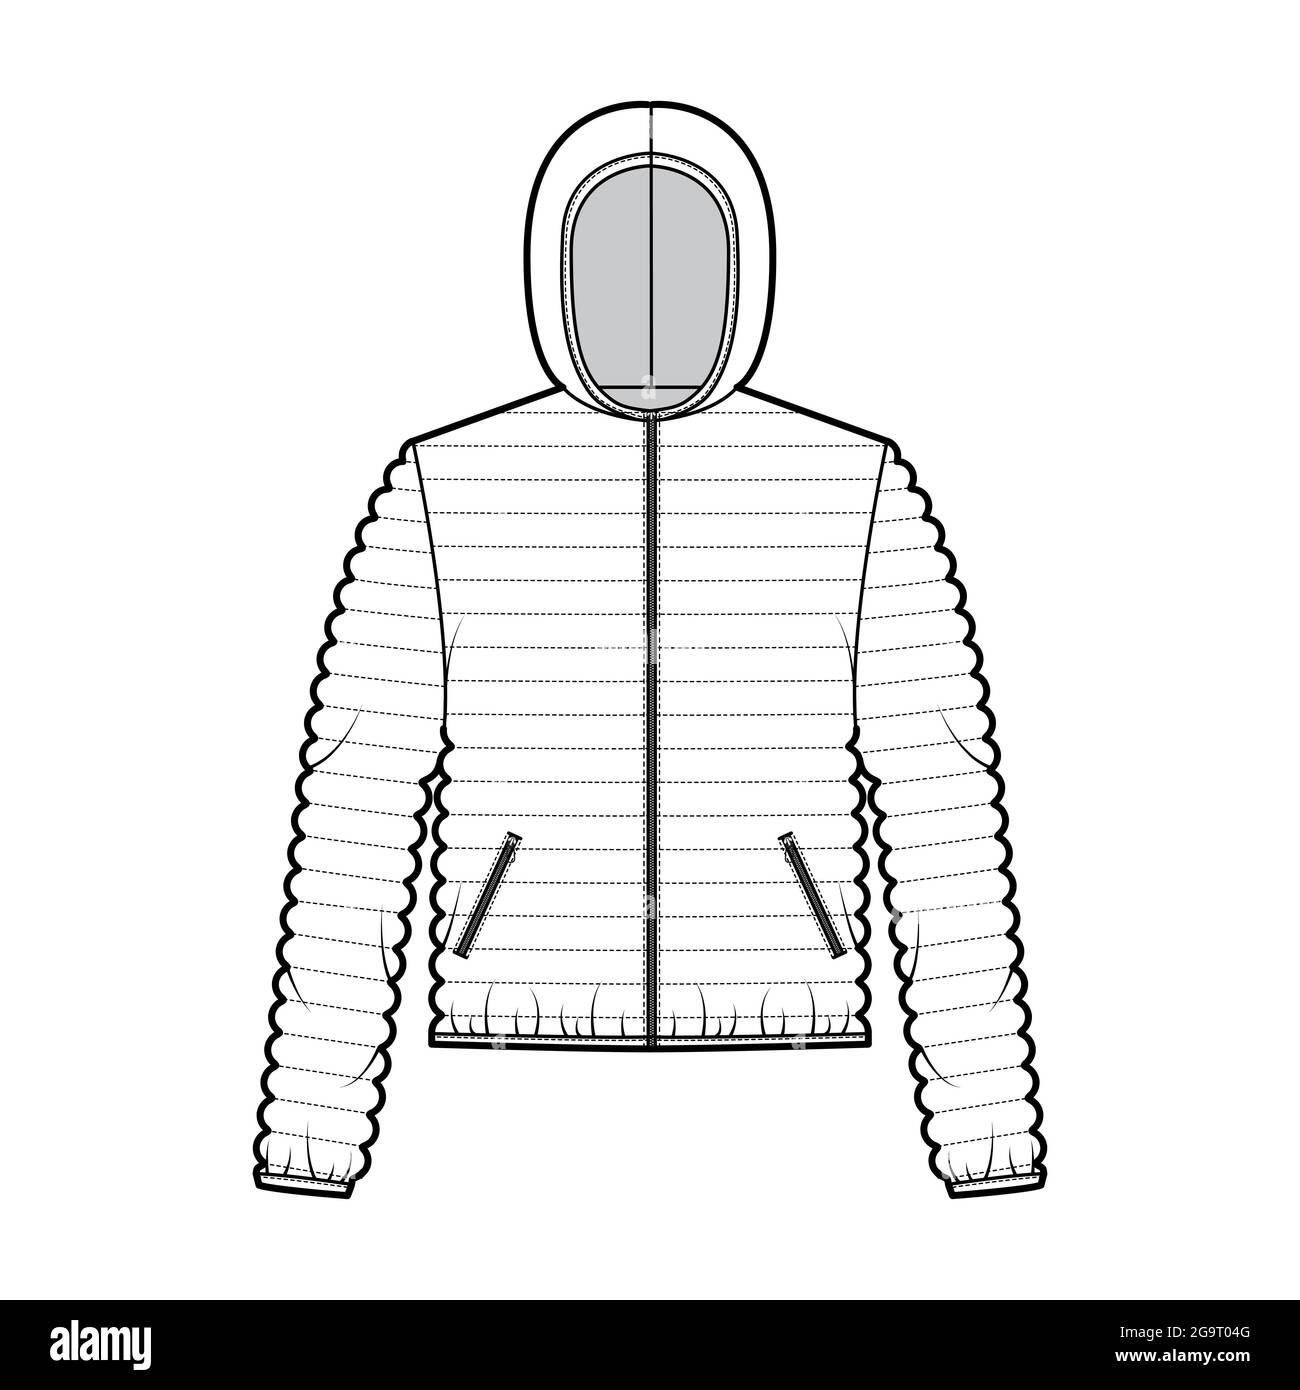 Hooded jacket Down puffer coat technical fashion illustration with long  sleeves, zip-up closure, boxy fit, crop length, wide quilting. Flat  template front, back, white color. Women, men top CAD Stock Vector Image